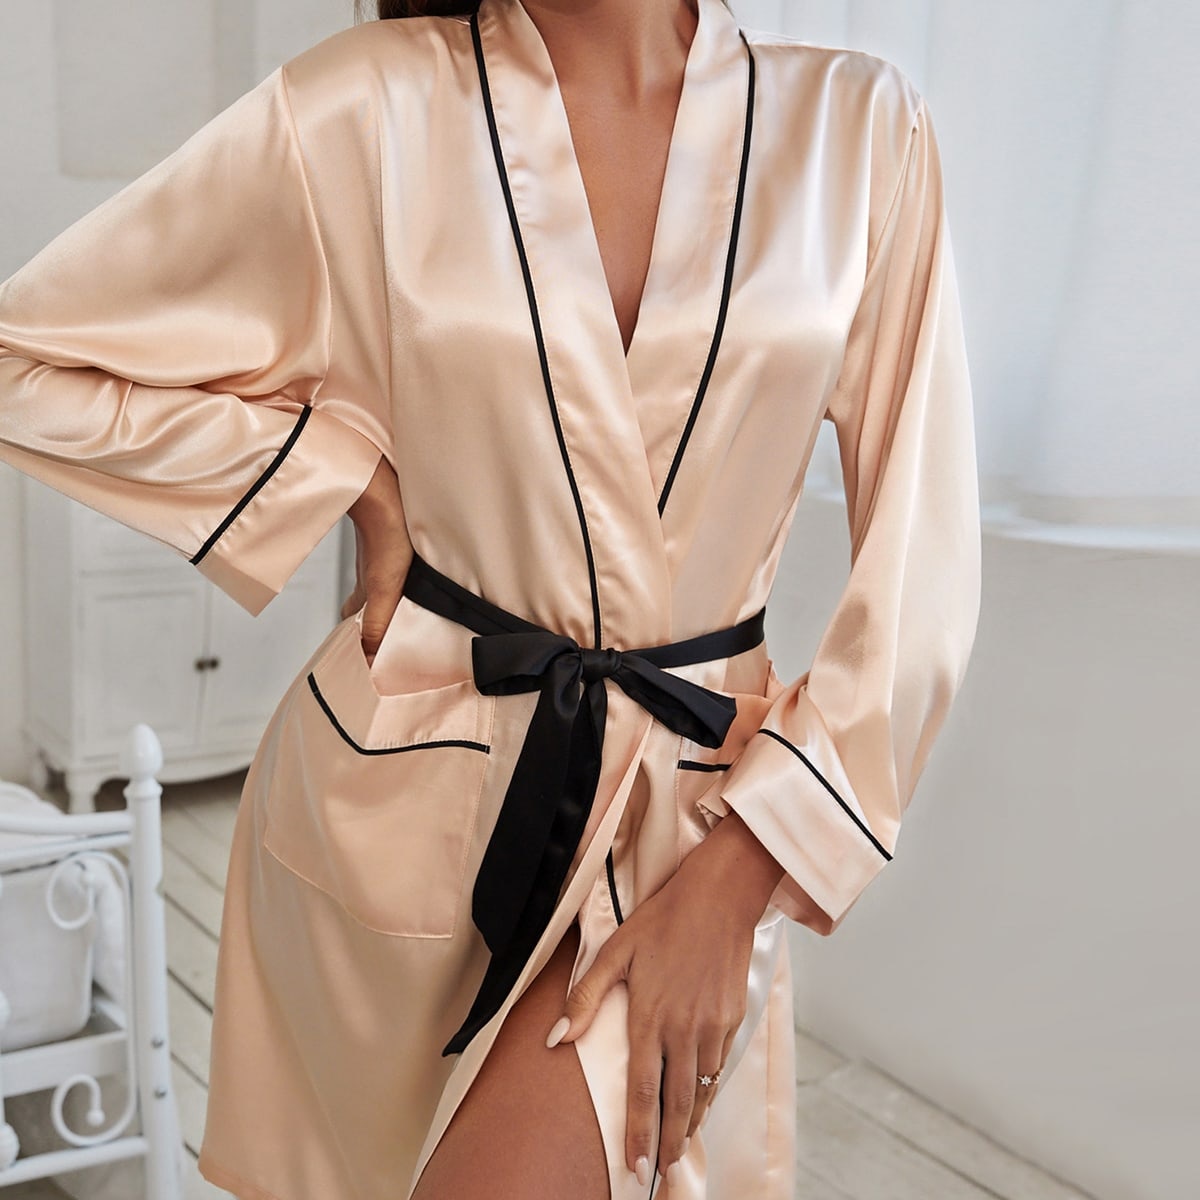 Women Nightgown Lingerie V-Neck Dressing Gown Nightdress Loose